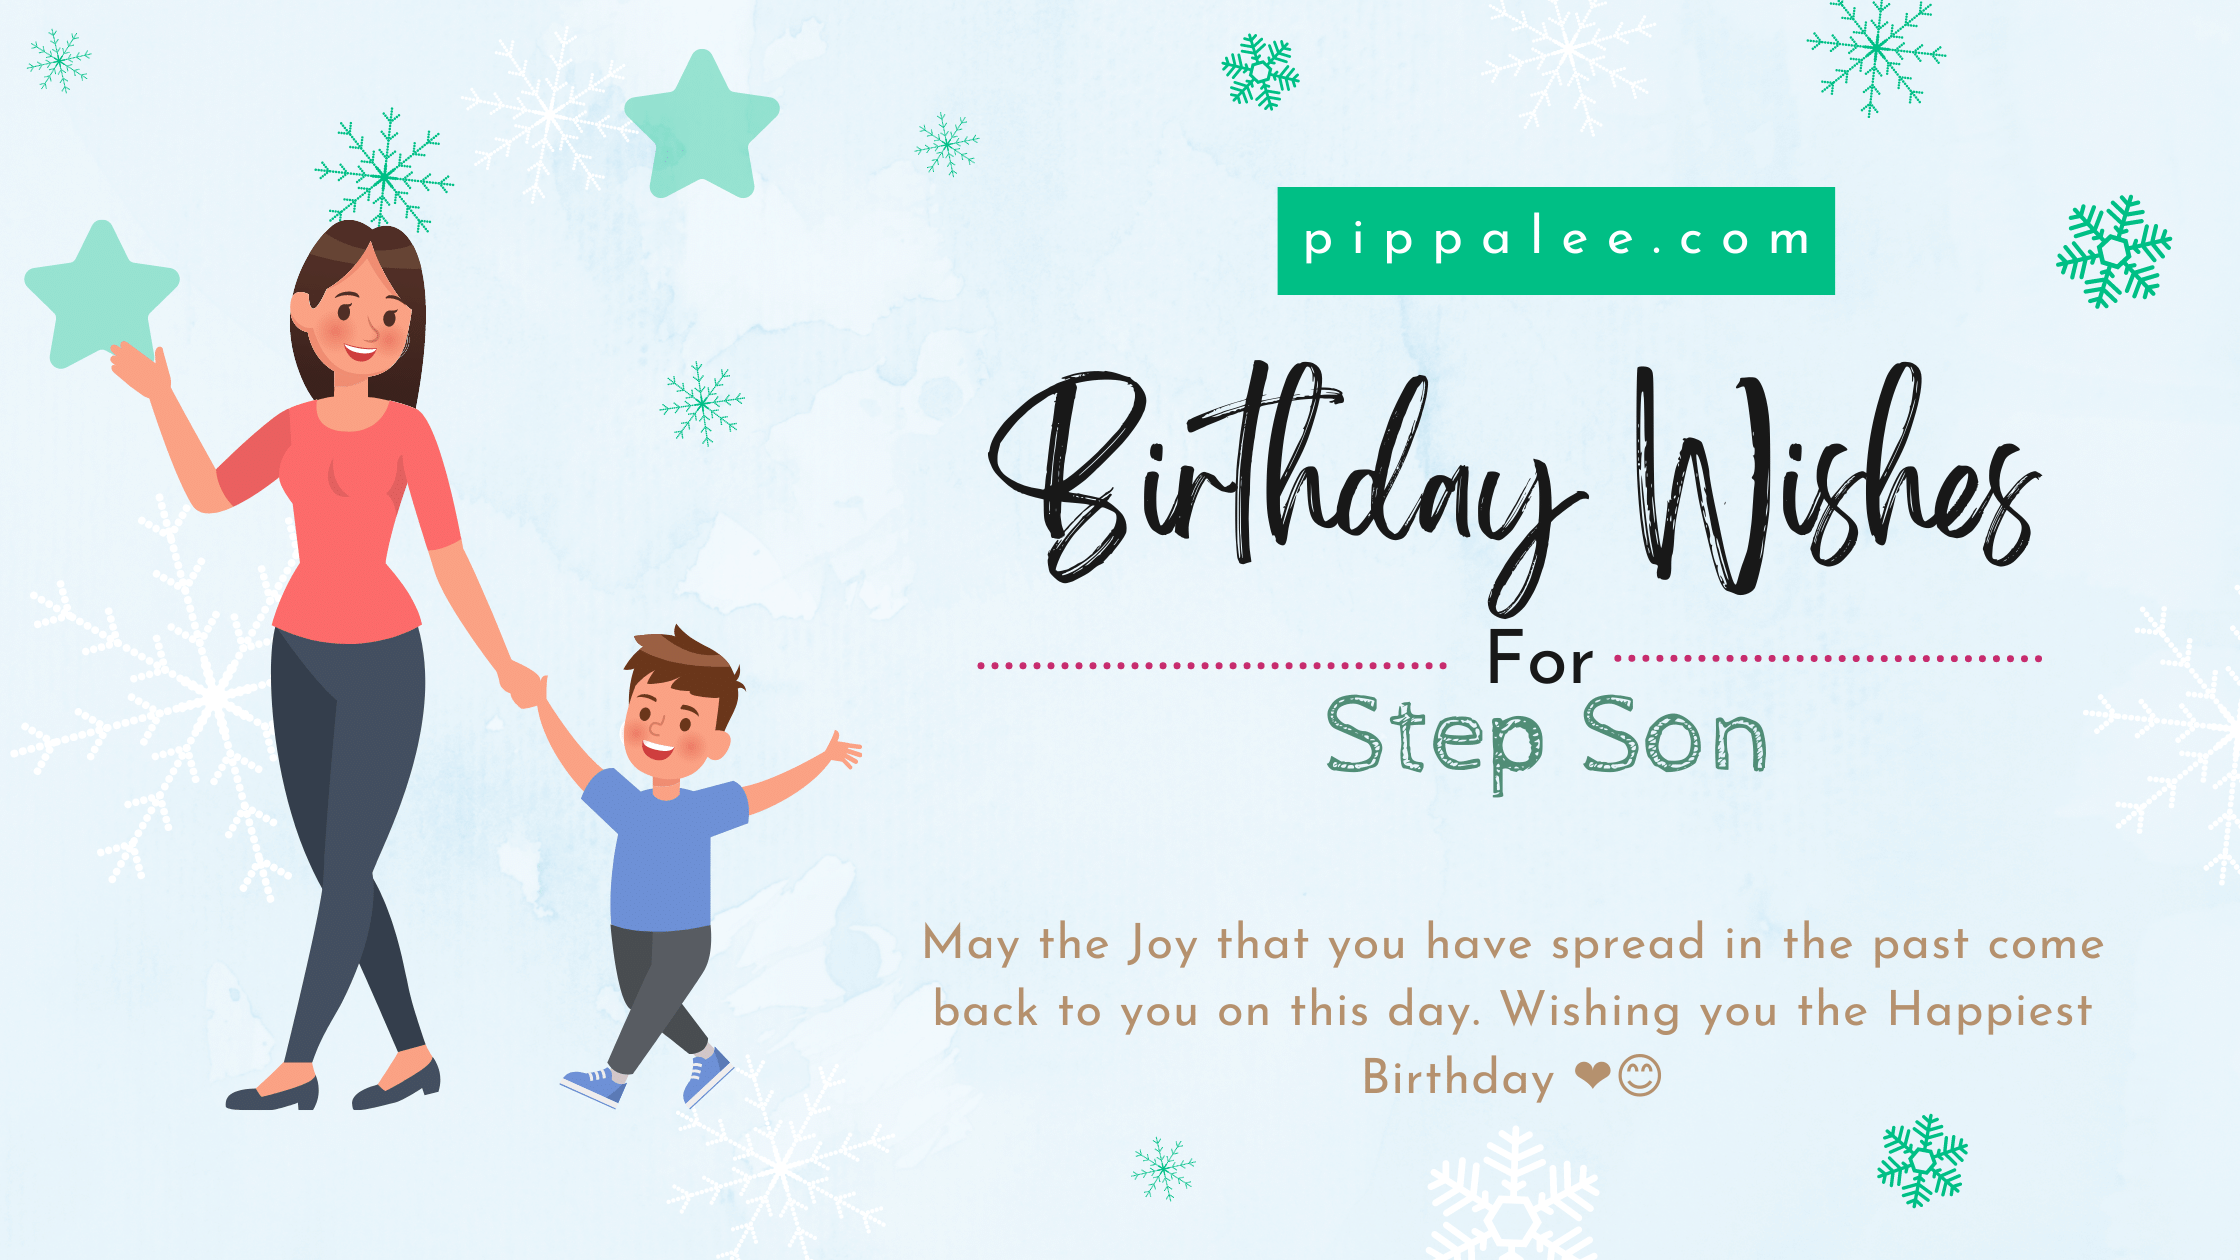 Birthday Wishes for Step Son - Wishes & Messages